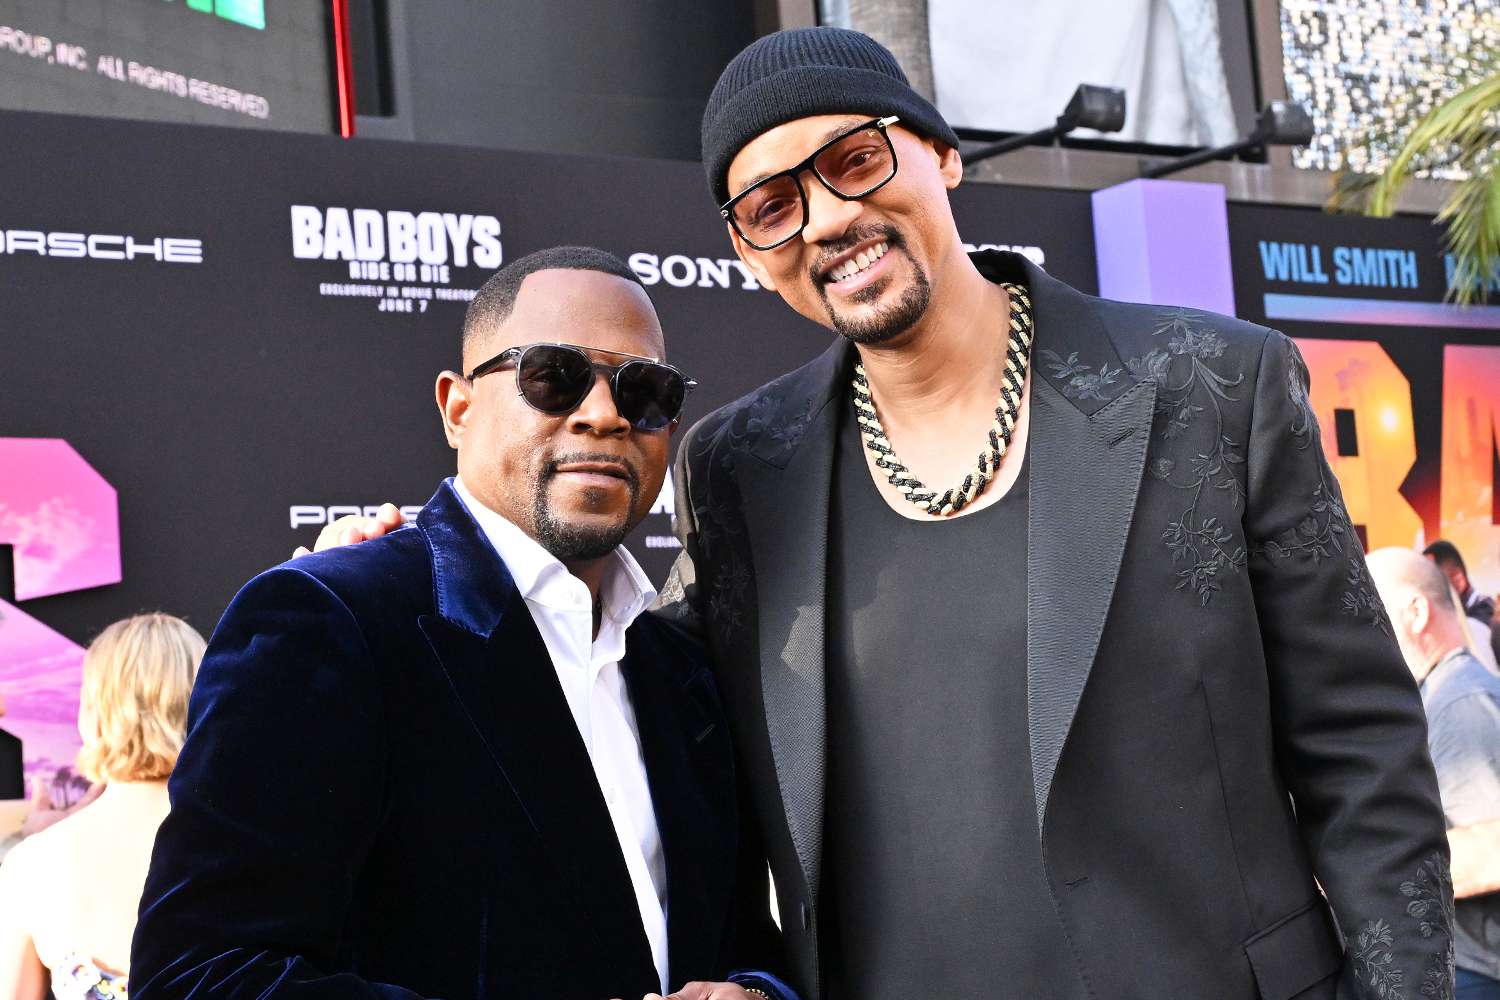 Will Smith Reveals One Quirky Thing About 'Bad Boys' Costar Martin Lawrence That Annoys Him (Exclusive)